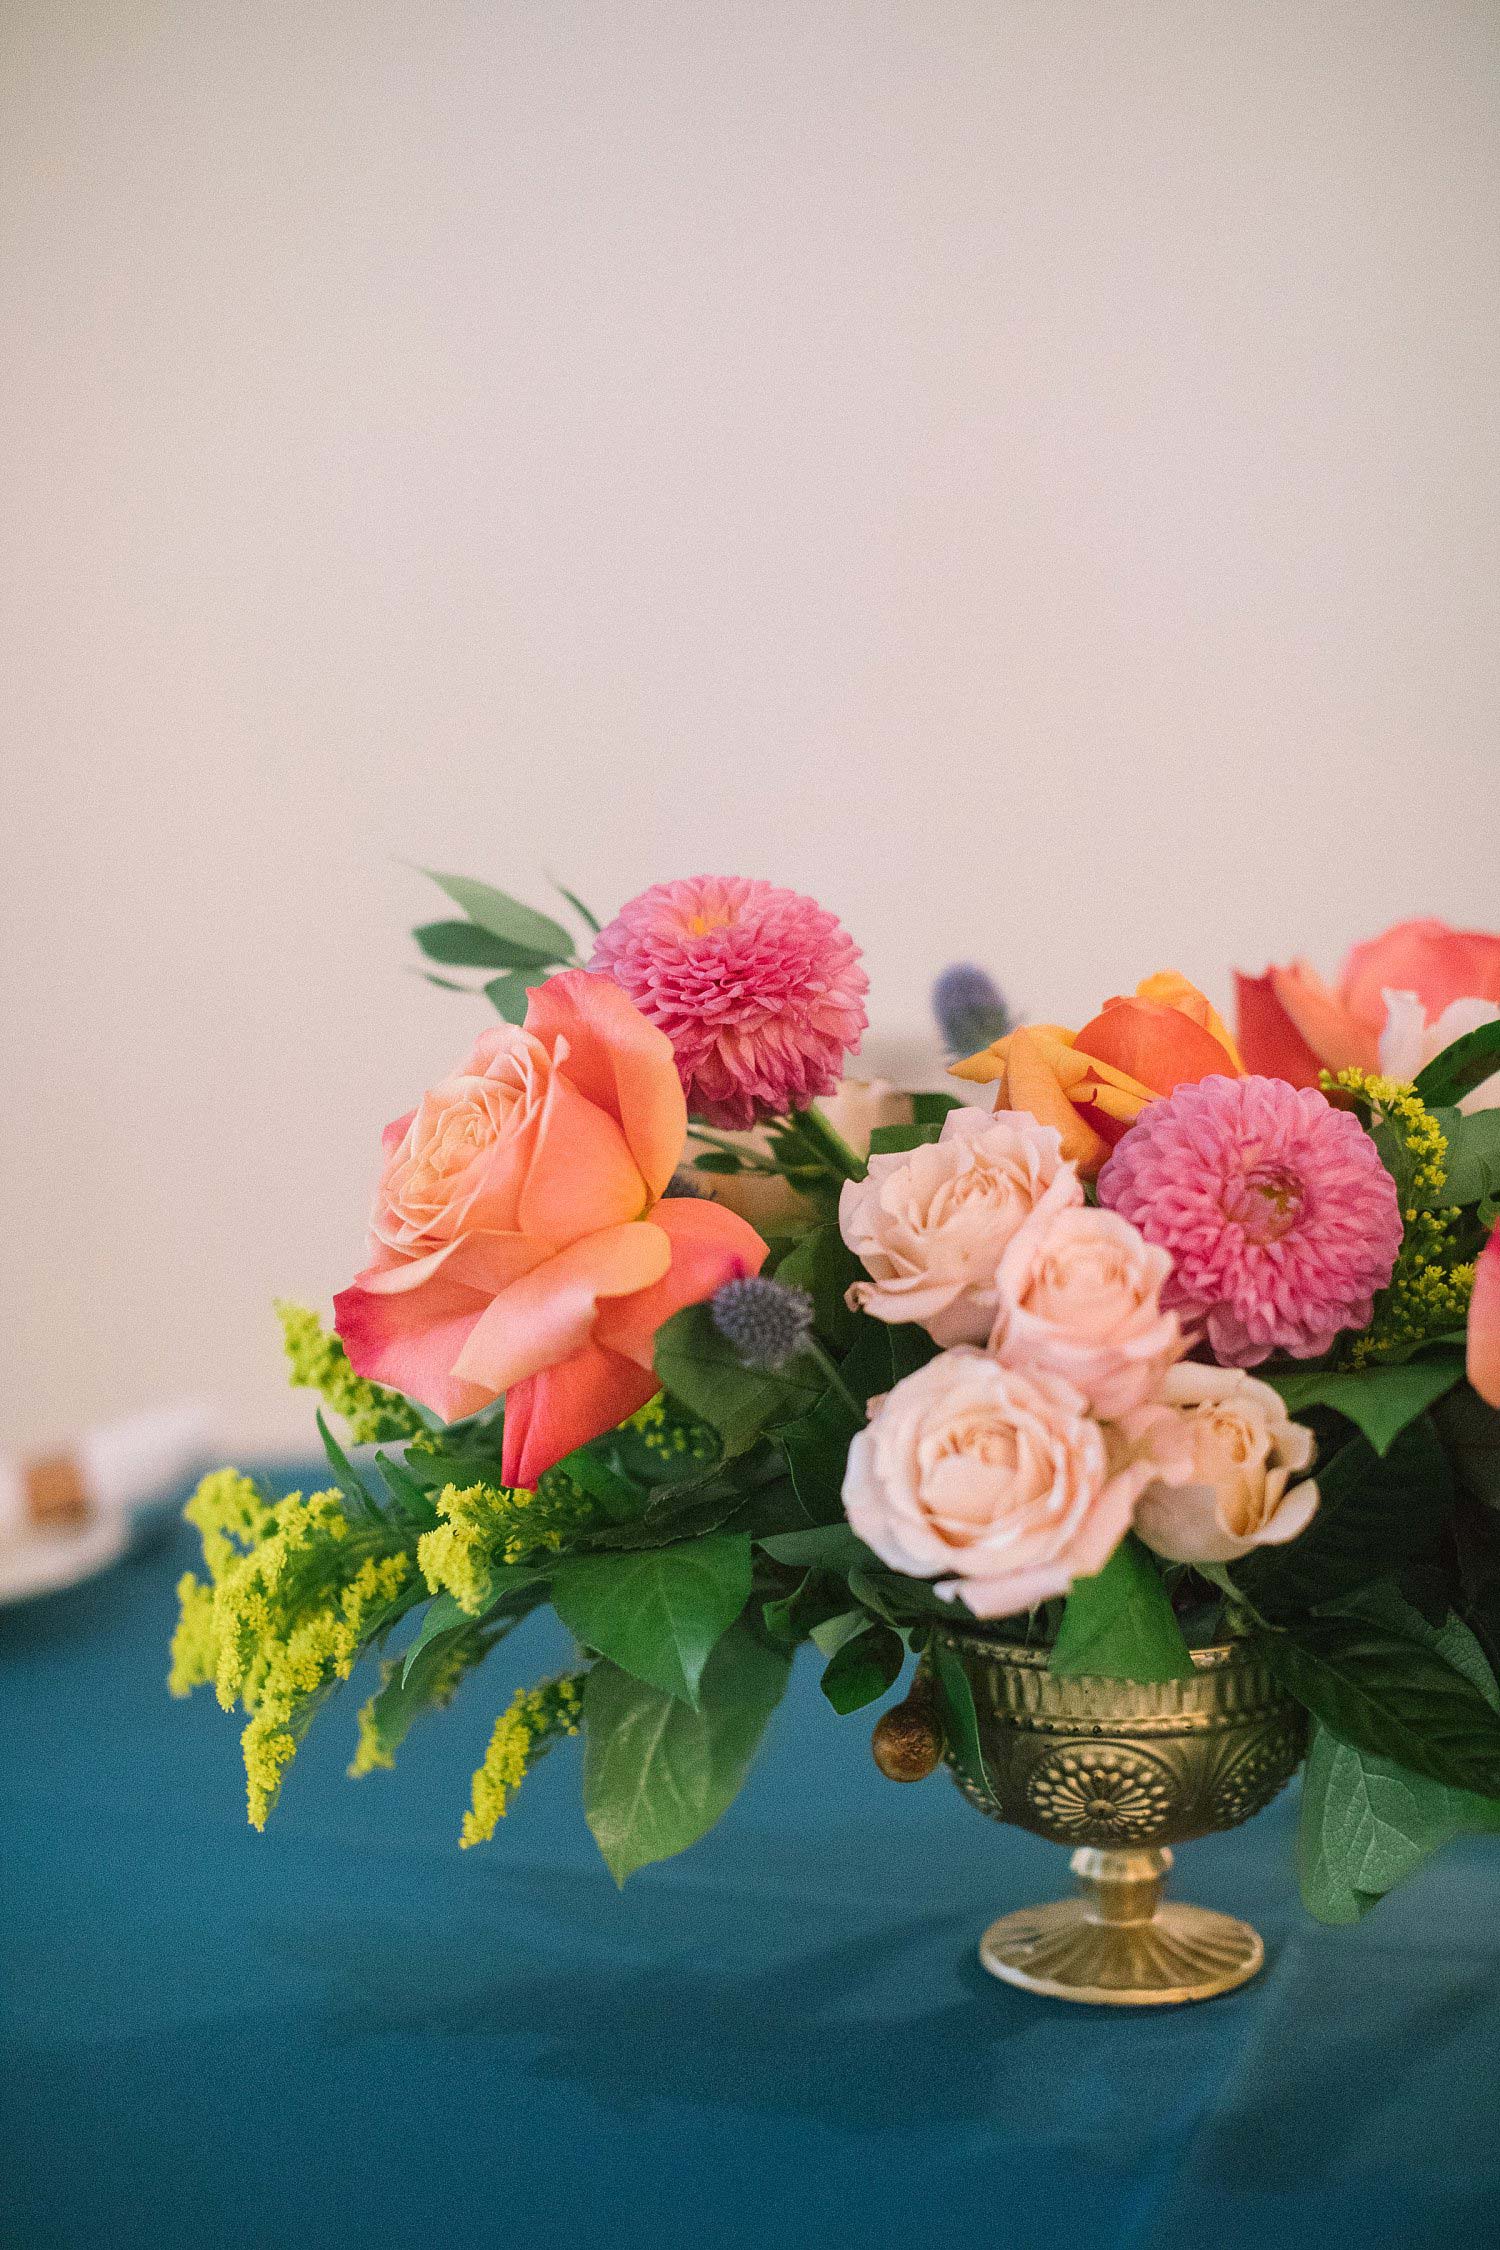 coral cream and apricot flowers with a blue tablecloth